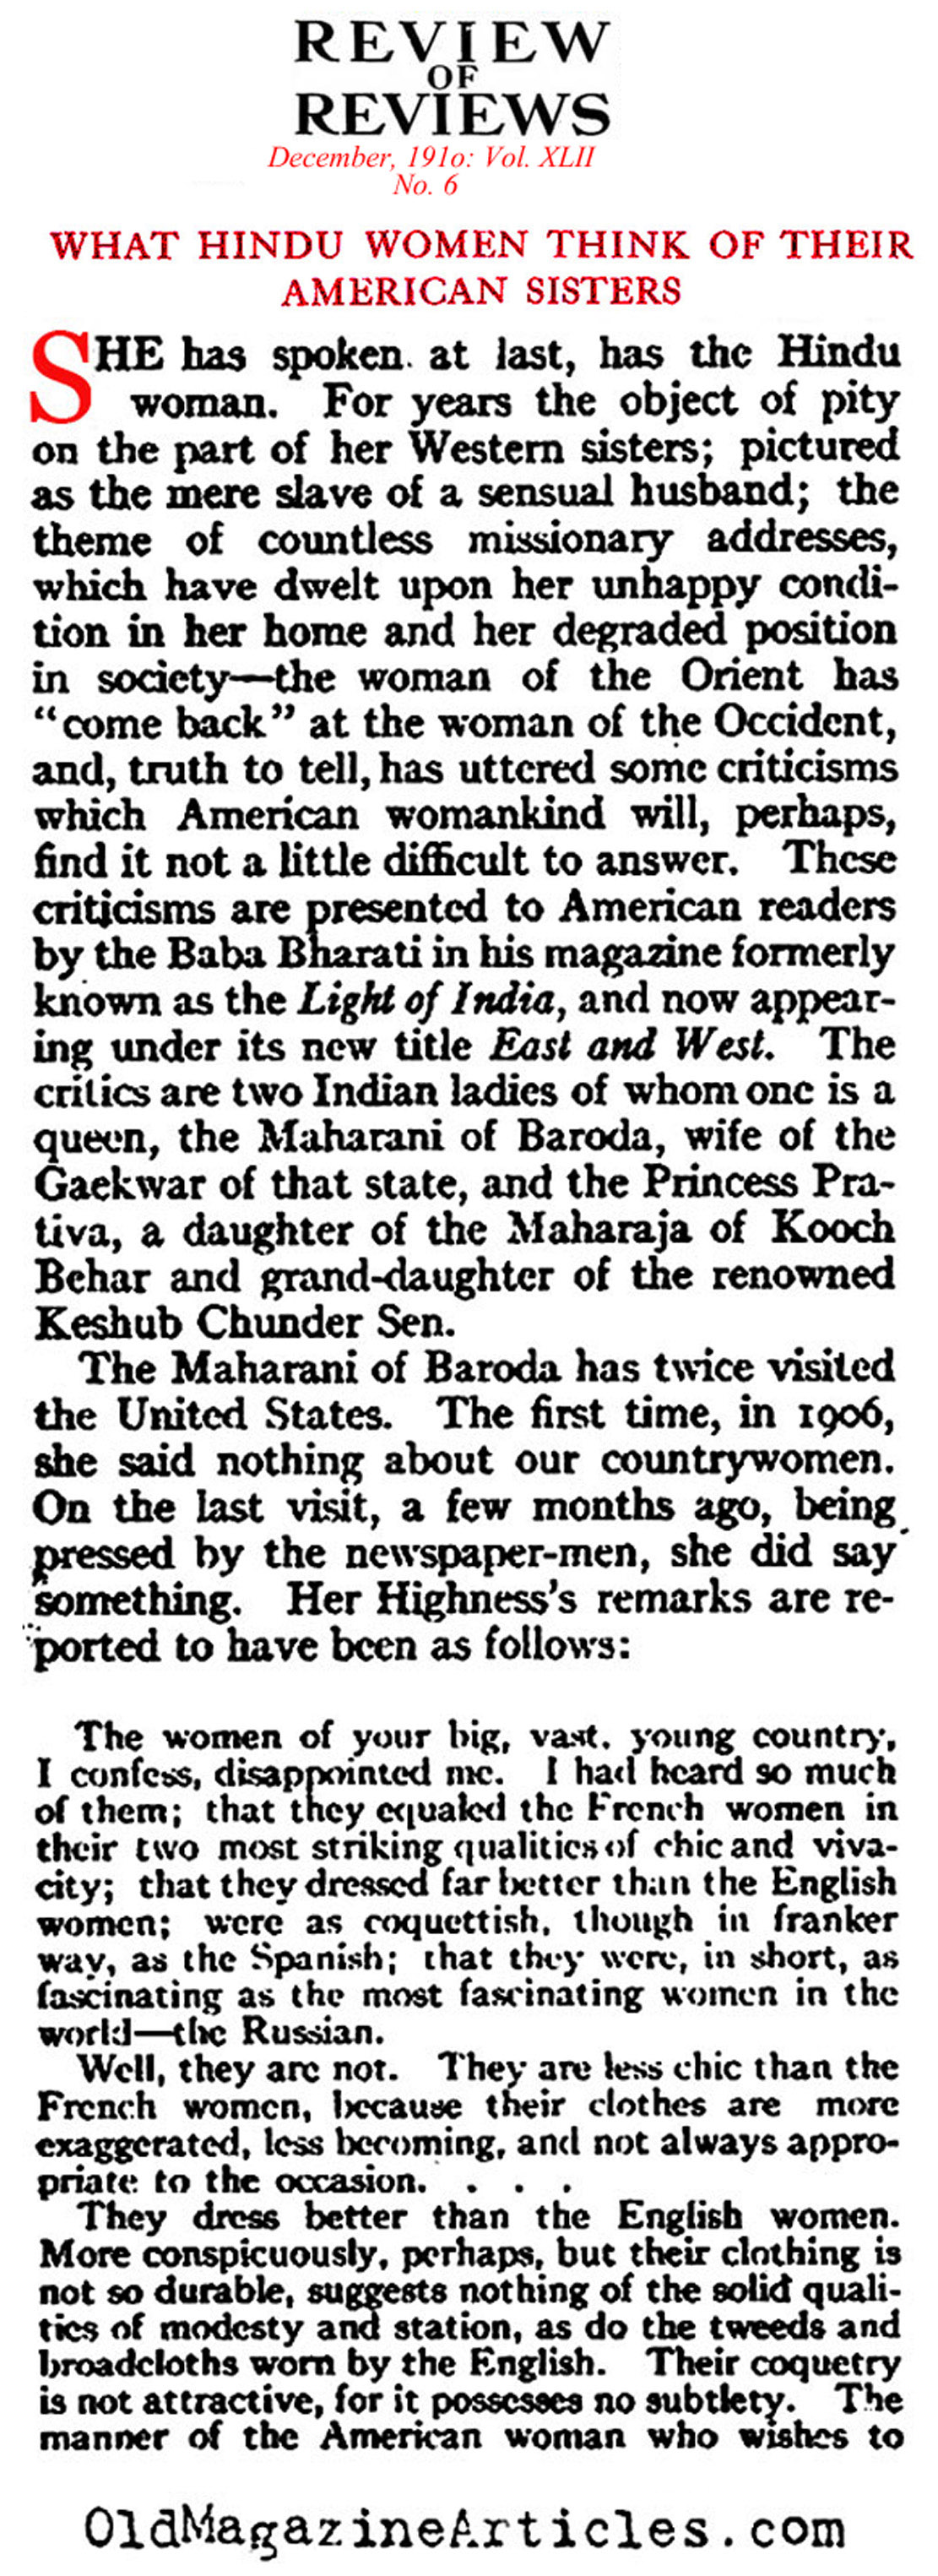 What Hindu Women Think of  American Suffrage (Review of Reviews, 1910)